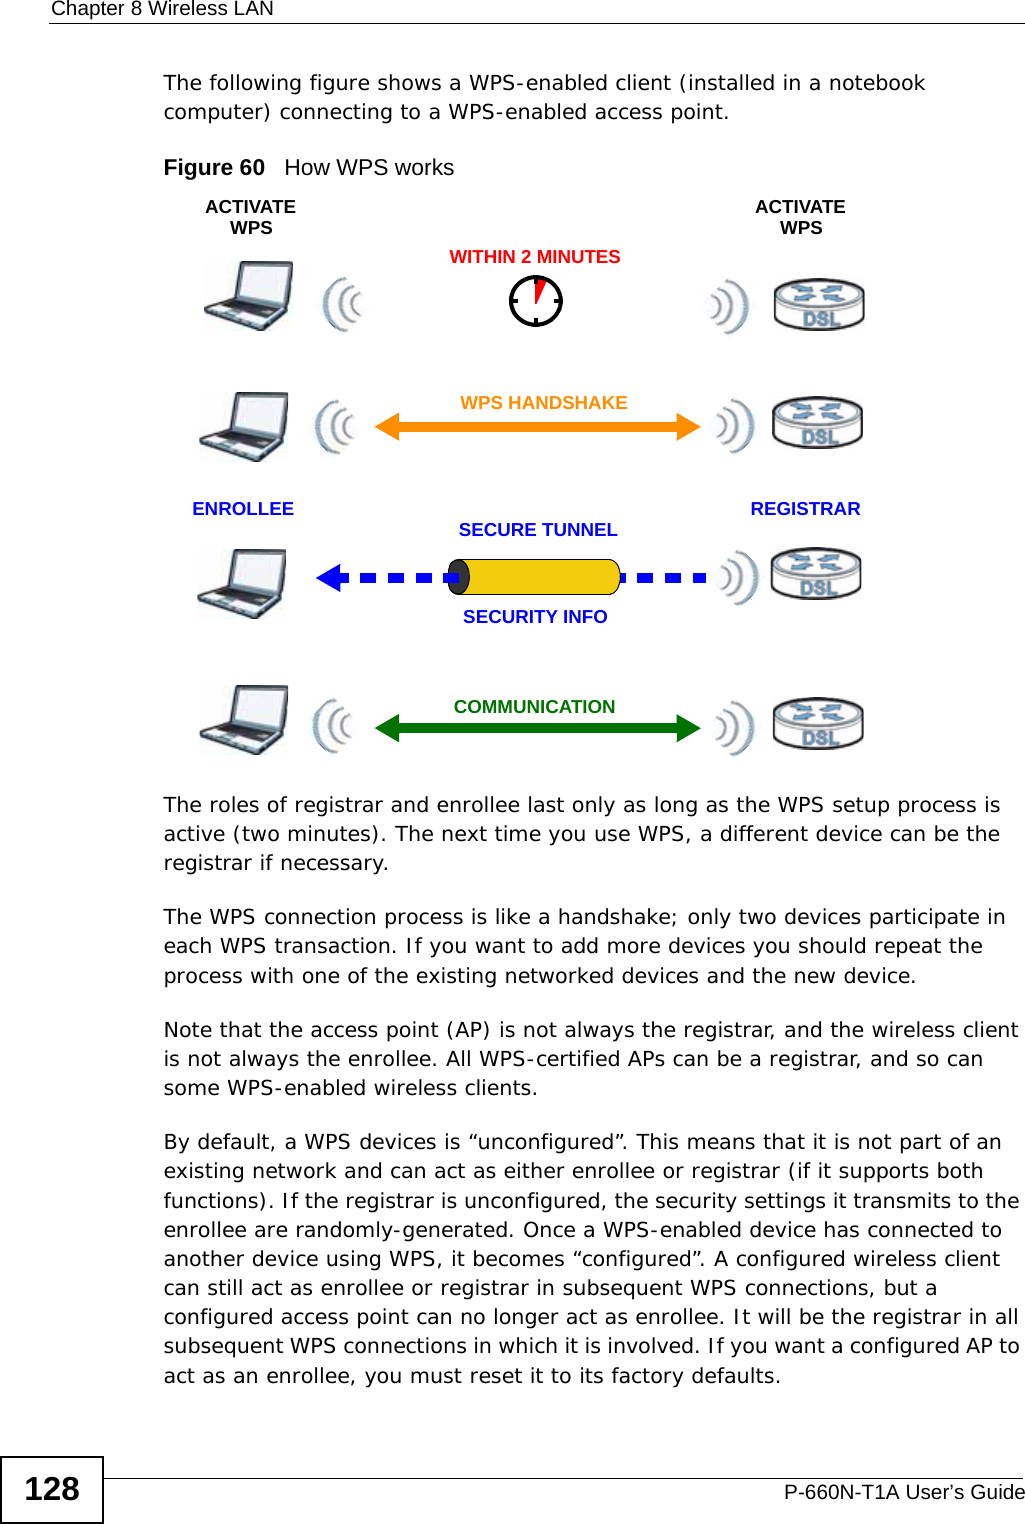 Chapter 8 Wireless LANP-660N-T1A User’s Guide128The following figure shows a WPS-enabled client (installed in a notebook computer) connecting to a WPS-enabled access point.Figure 60   How WPS worksThe roles of registrar and enrollee last only as long as the WPS setup process is active (two minutes). The next time you use WPS, a different device can be the registrar if necessary.The WPS connection process is like a handshake; only two devices participate in each WPS transaction. If you want to add more devices you should repeat the process with one of the existing networked devices and the new device.Note that the access point (AP) is not always the registrar, and the wireless client is not always the enrollee. All WPS-certified APs can be a registrar, and so can some WPS-enabled wireless clients.By default, a WPS devices is “unconfigured”. This means that it is not part of an existing network and can act as either enrollee or registrar (if it supports both functions). If the registrar is unconfigured, the security settings it transmits to the enrollee are randomly-generated. Once a WPS-enabled device has connected to another device using WPS, it becomes “configured”. A configured wireless client can still act as enrollee or registrar in subsequent WPS connections, but a configured access point can no longer act as enrollee. It will be the registrar in all subsequent WPS connections in which it is involved. If you want a configured AP to act as an enrollee, you must reset it to its factory defaults.SECURE TUNNELSECURITY INFOWITHIN 2 MINUTESCOMMUNICATIONACTIVATEWPSACTIVATEWPSWPS HANDSHAKEREGISTRARENROLLEE